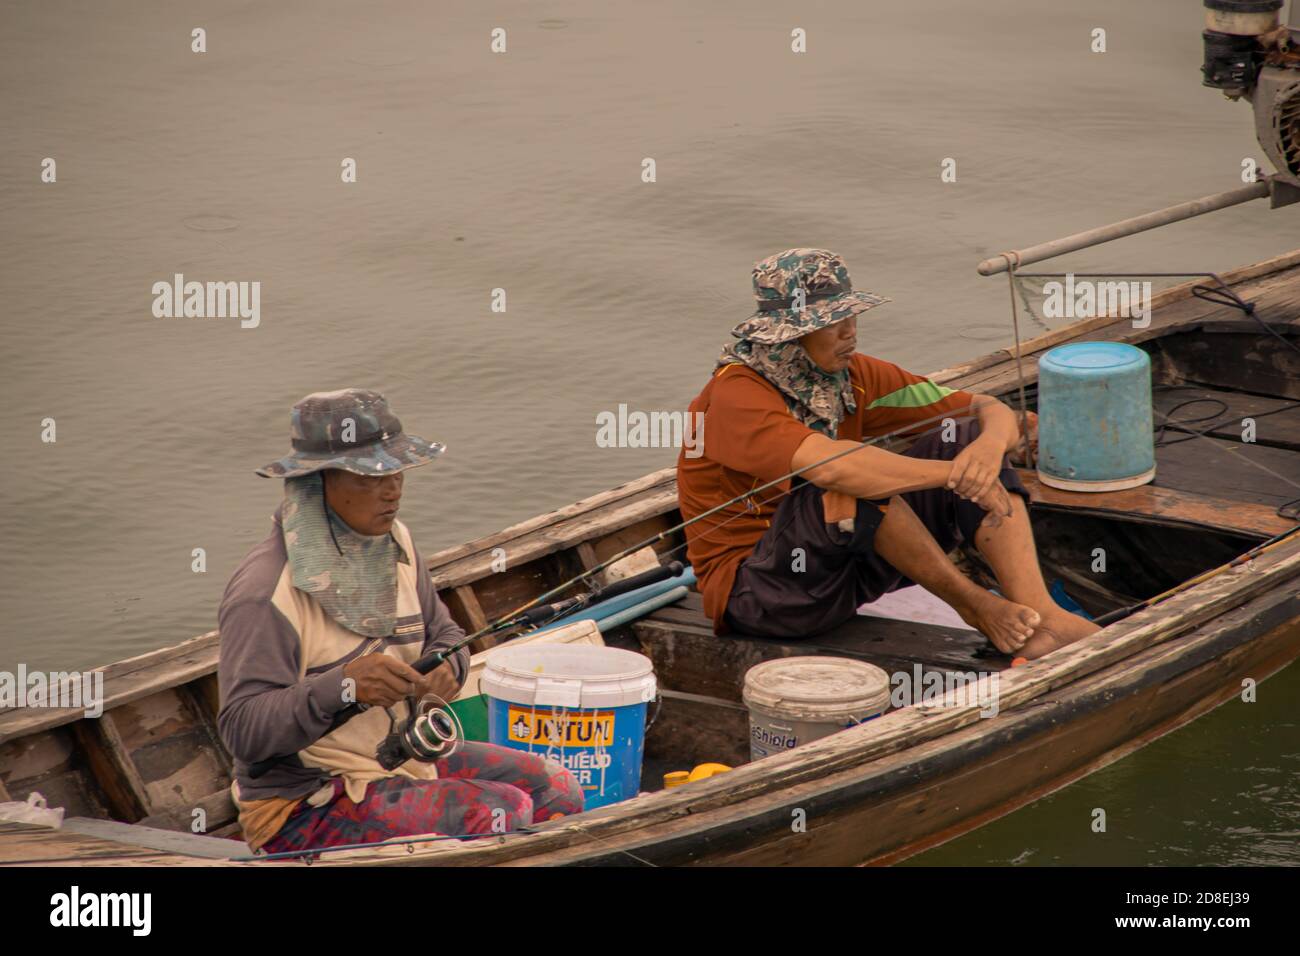 Two people fishing in a boat, Thailand, Koh Phangan, September